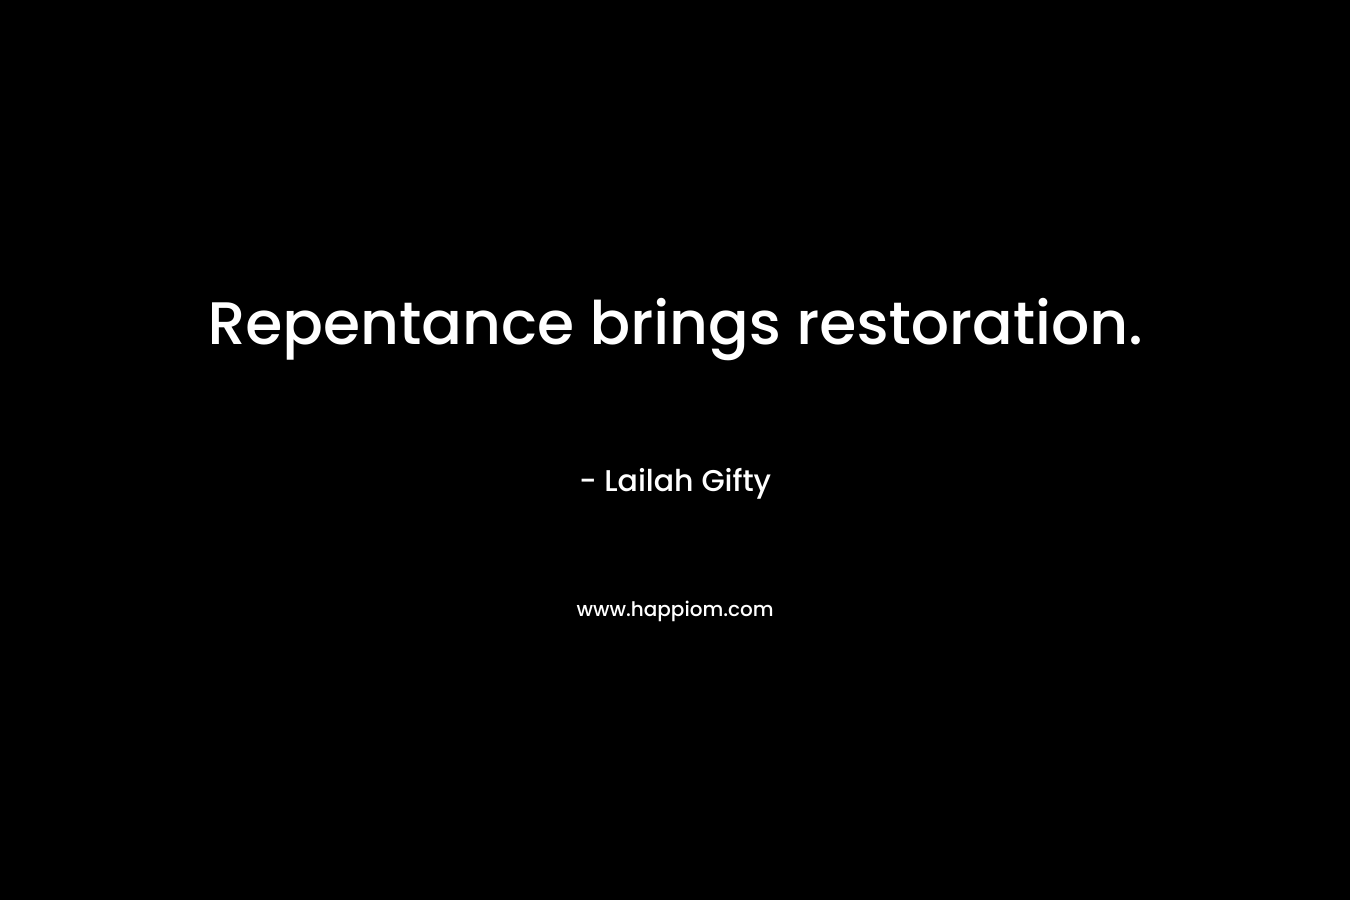 Repentance brings restoration. – Lailah Gifty